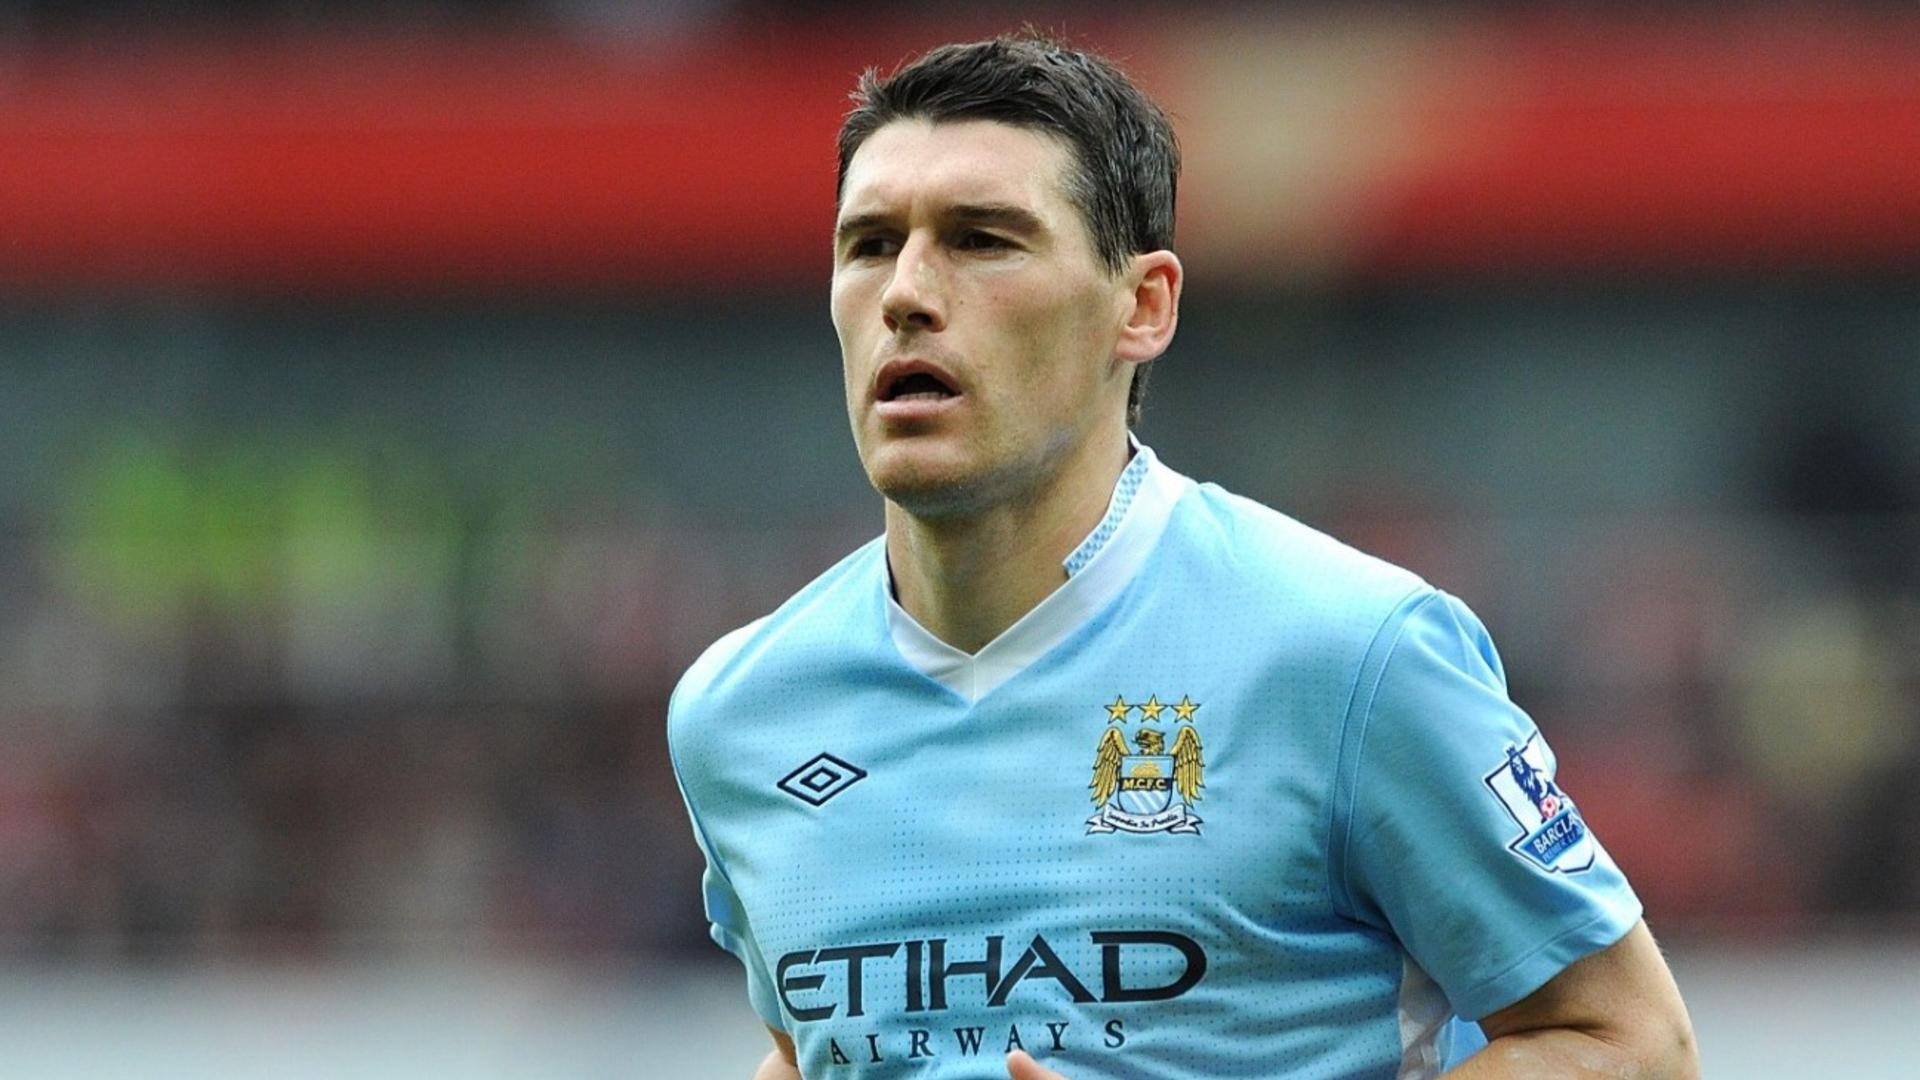 Most appearances in Premier League: Gareth Barry tops the charts